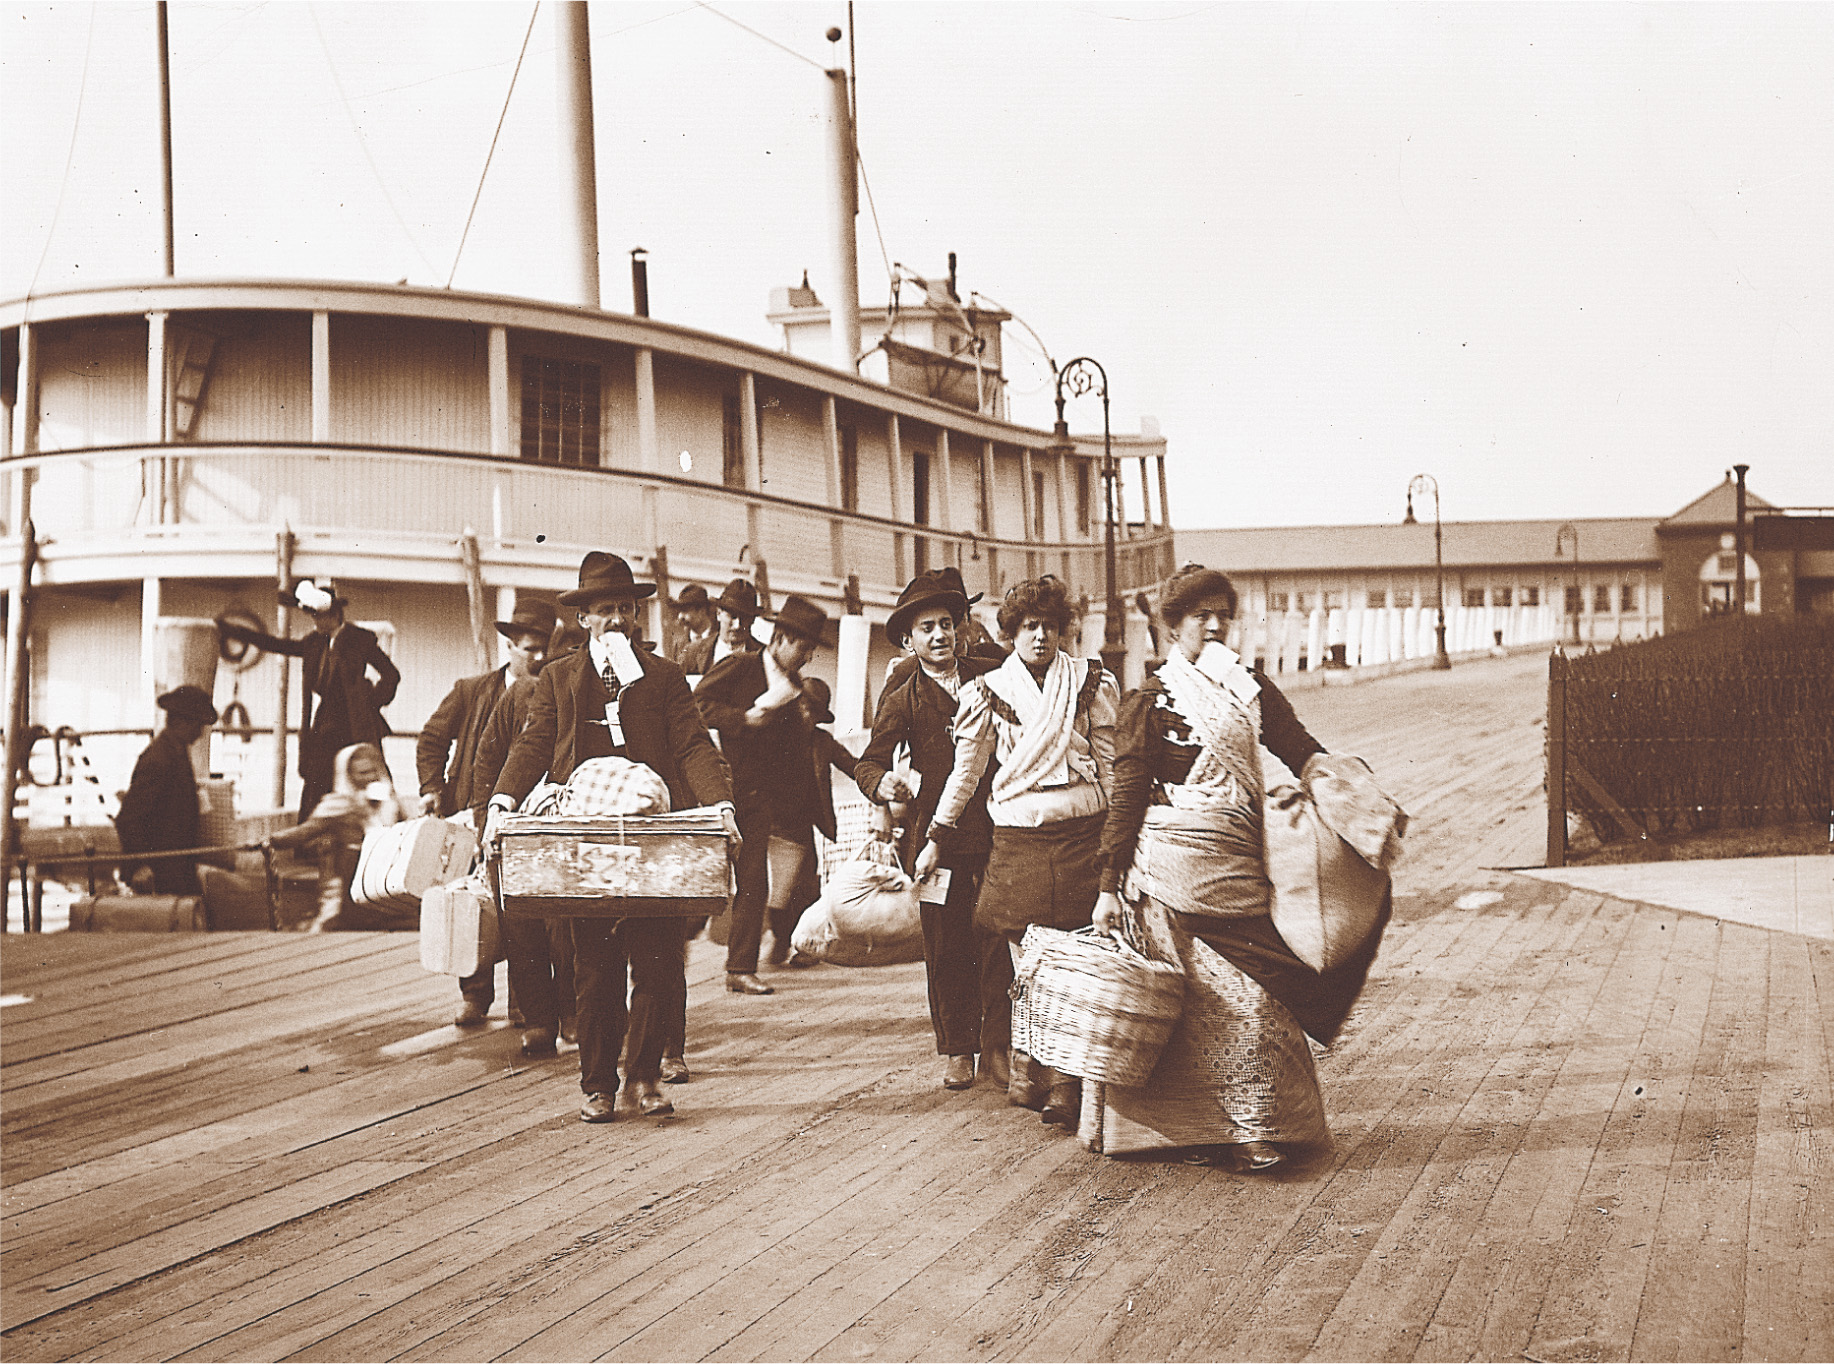 A photo: immigrants carrying suitcases step off a boat onto a dock.